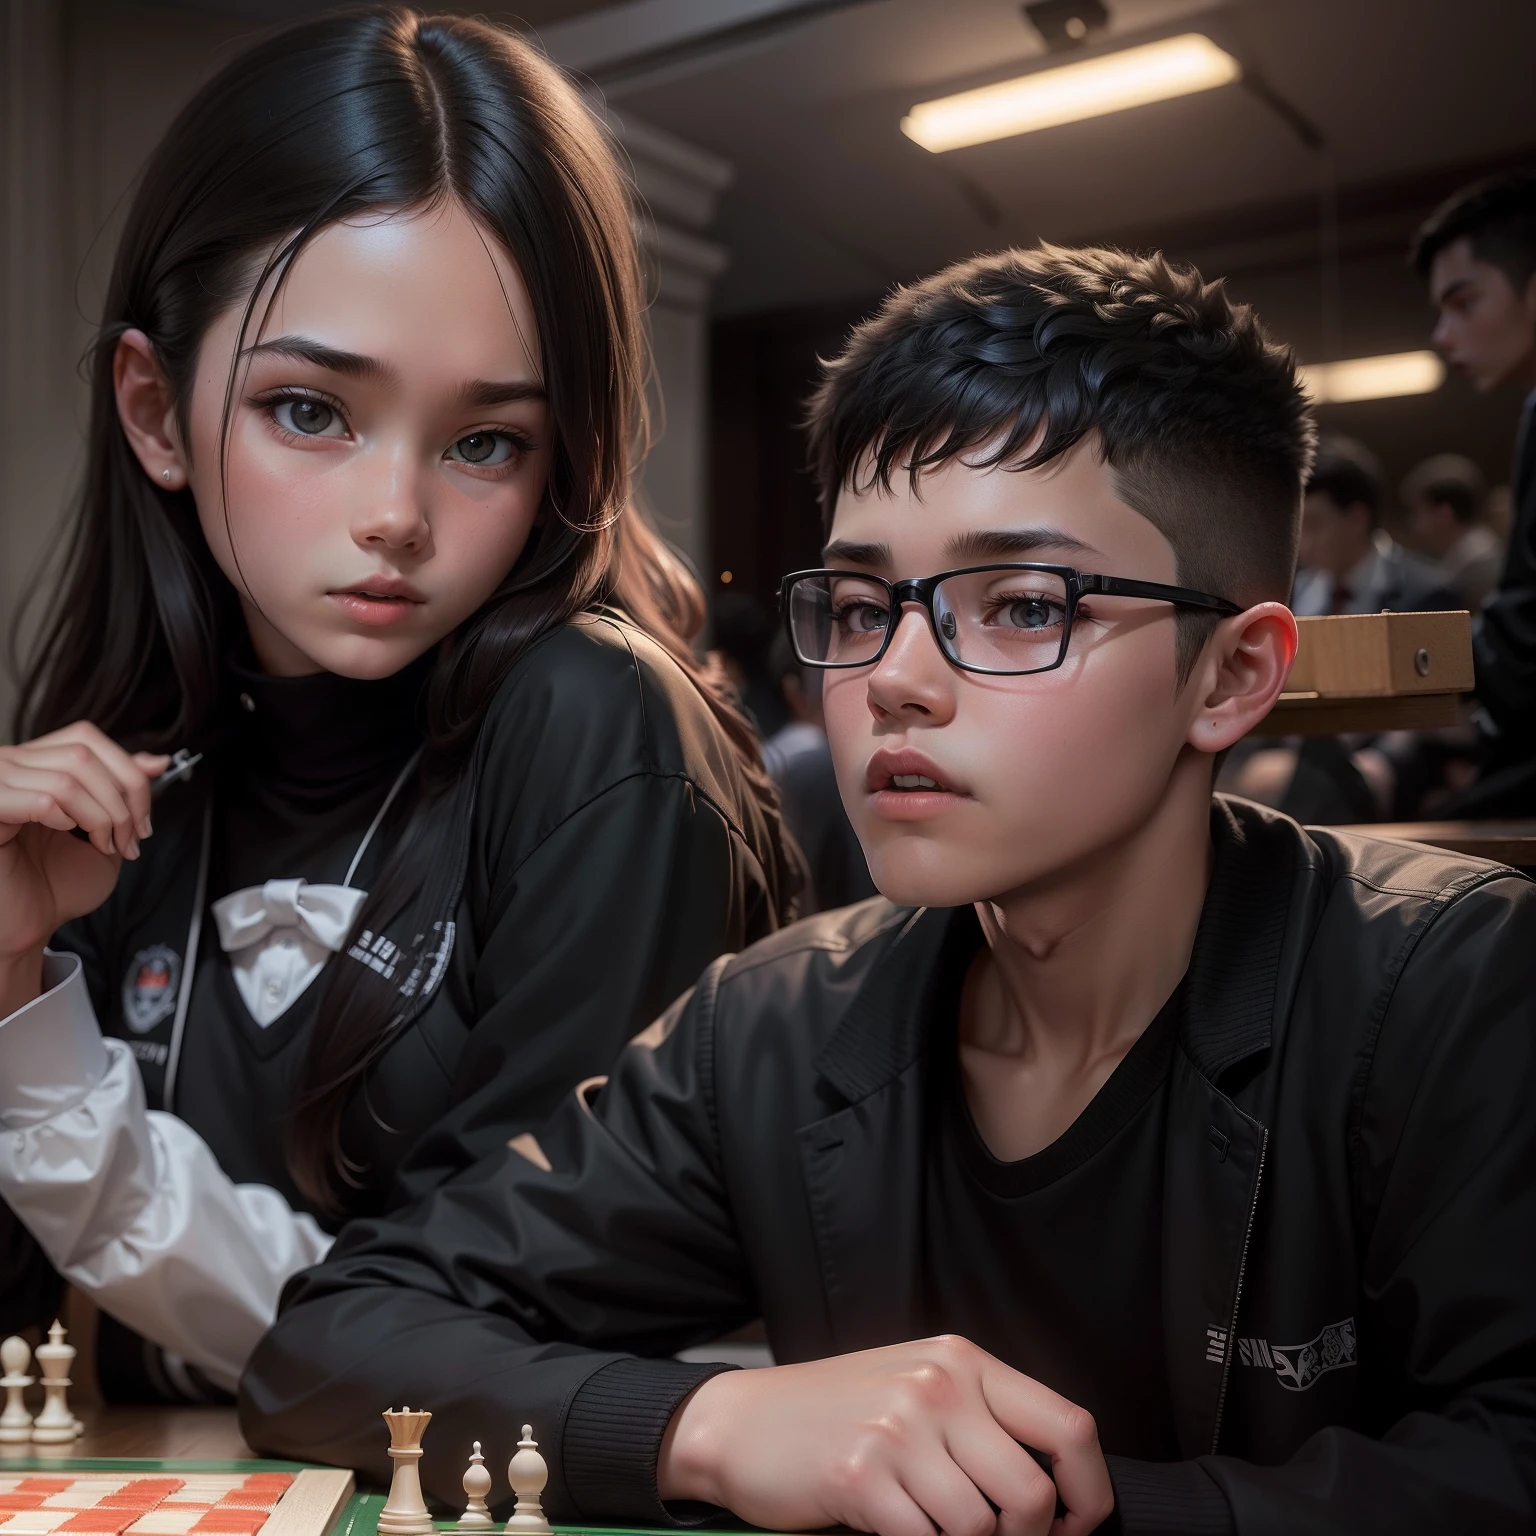 Boy wearing school shirt and black coat playing chess against someone, some people and a cute school girl watching the game,